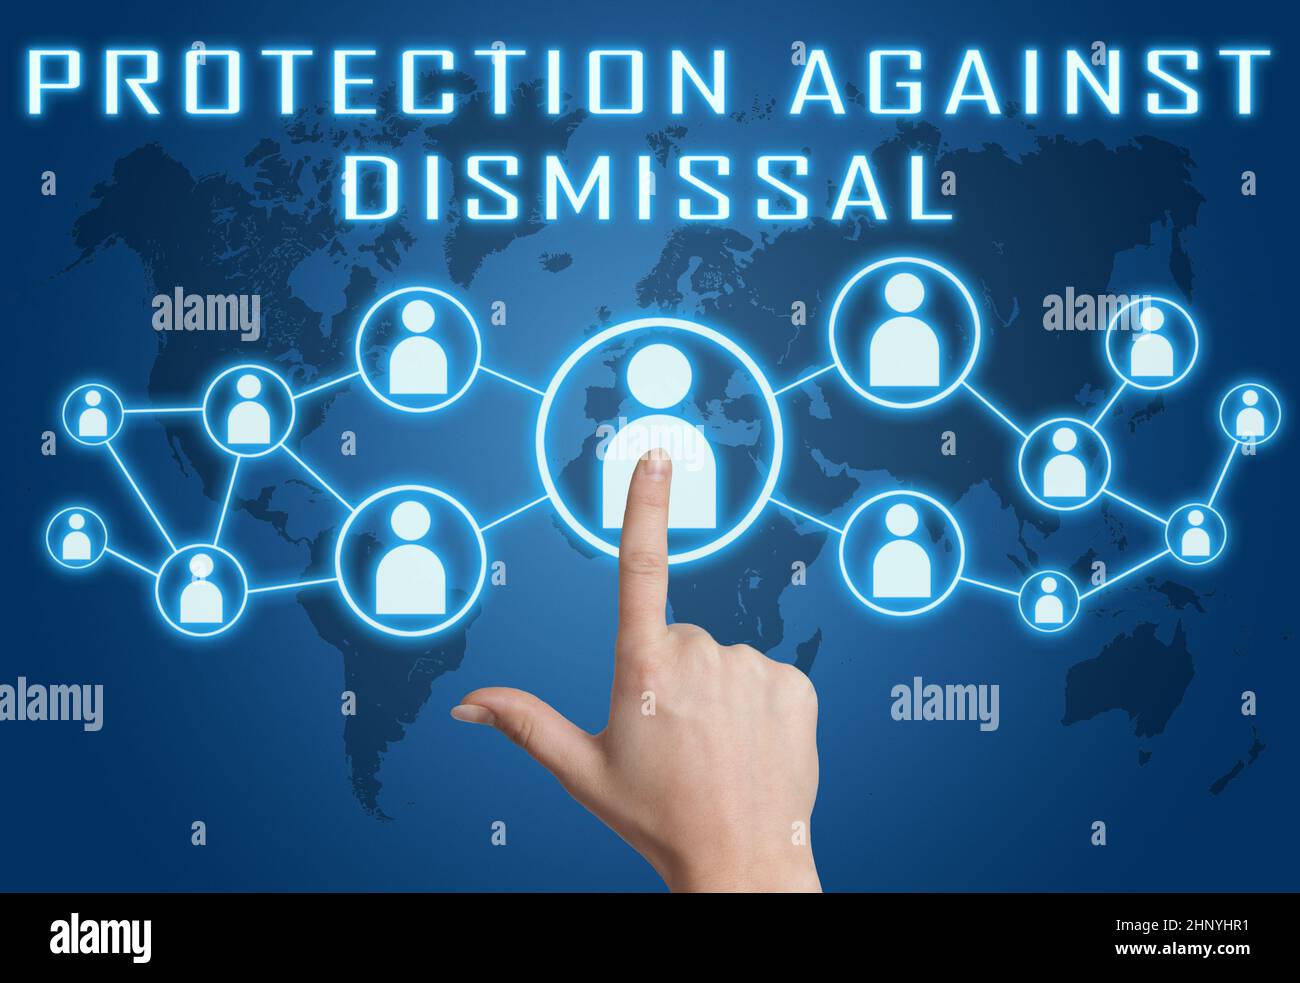 Protection against Dismissal - text concept with hand pressing social icons on blue world map background. Stock Photo